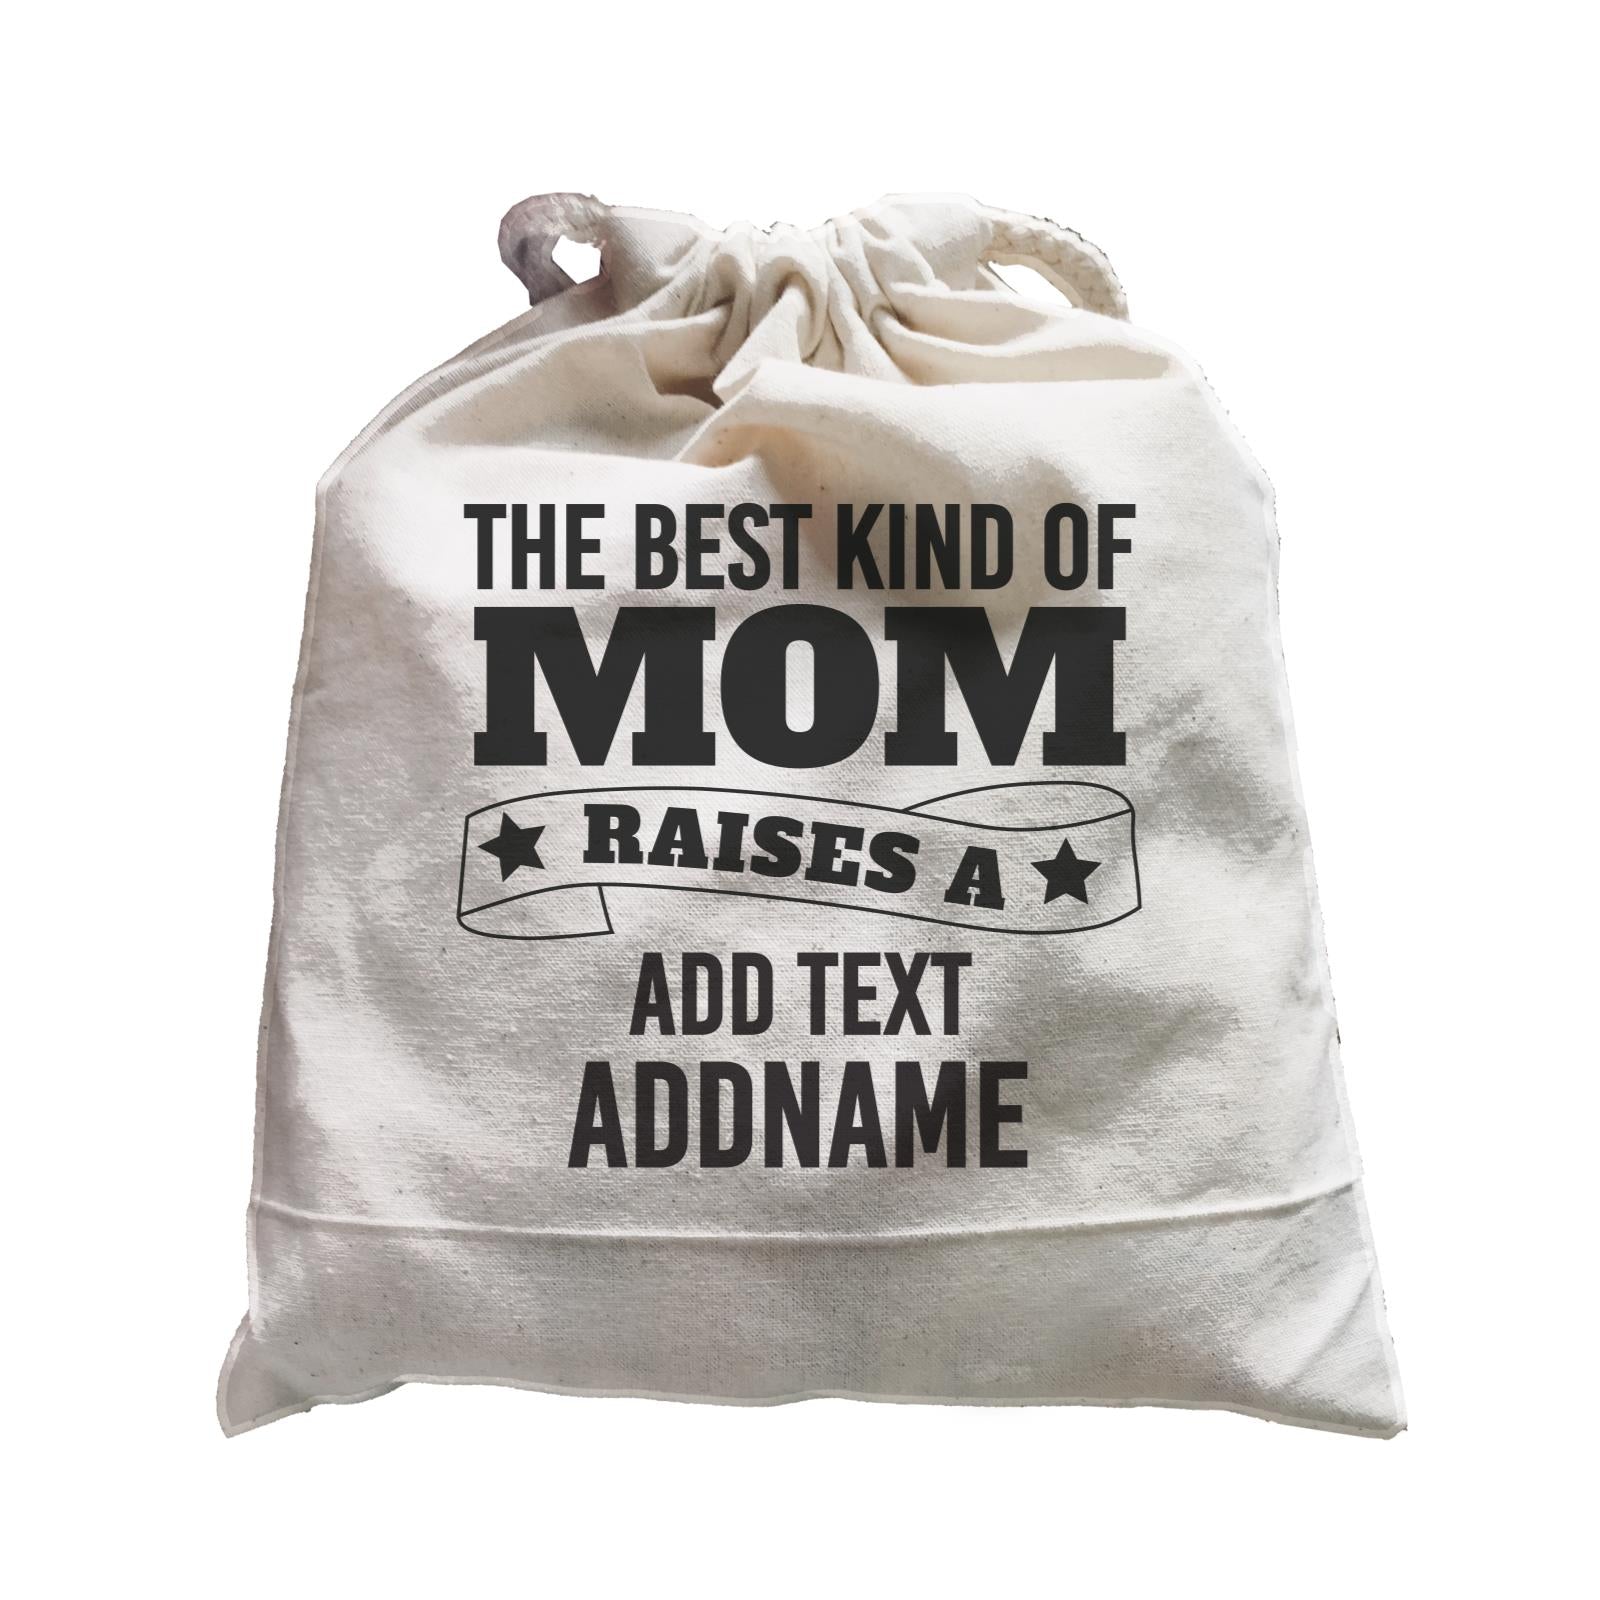 Awesome Mom 2 The Best Kind Of Mom Raises A Add Text And Addname Satchel